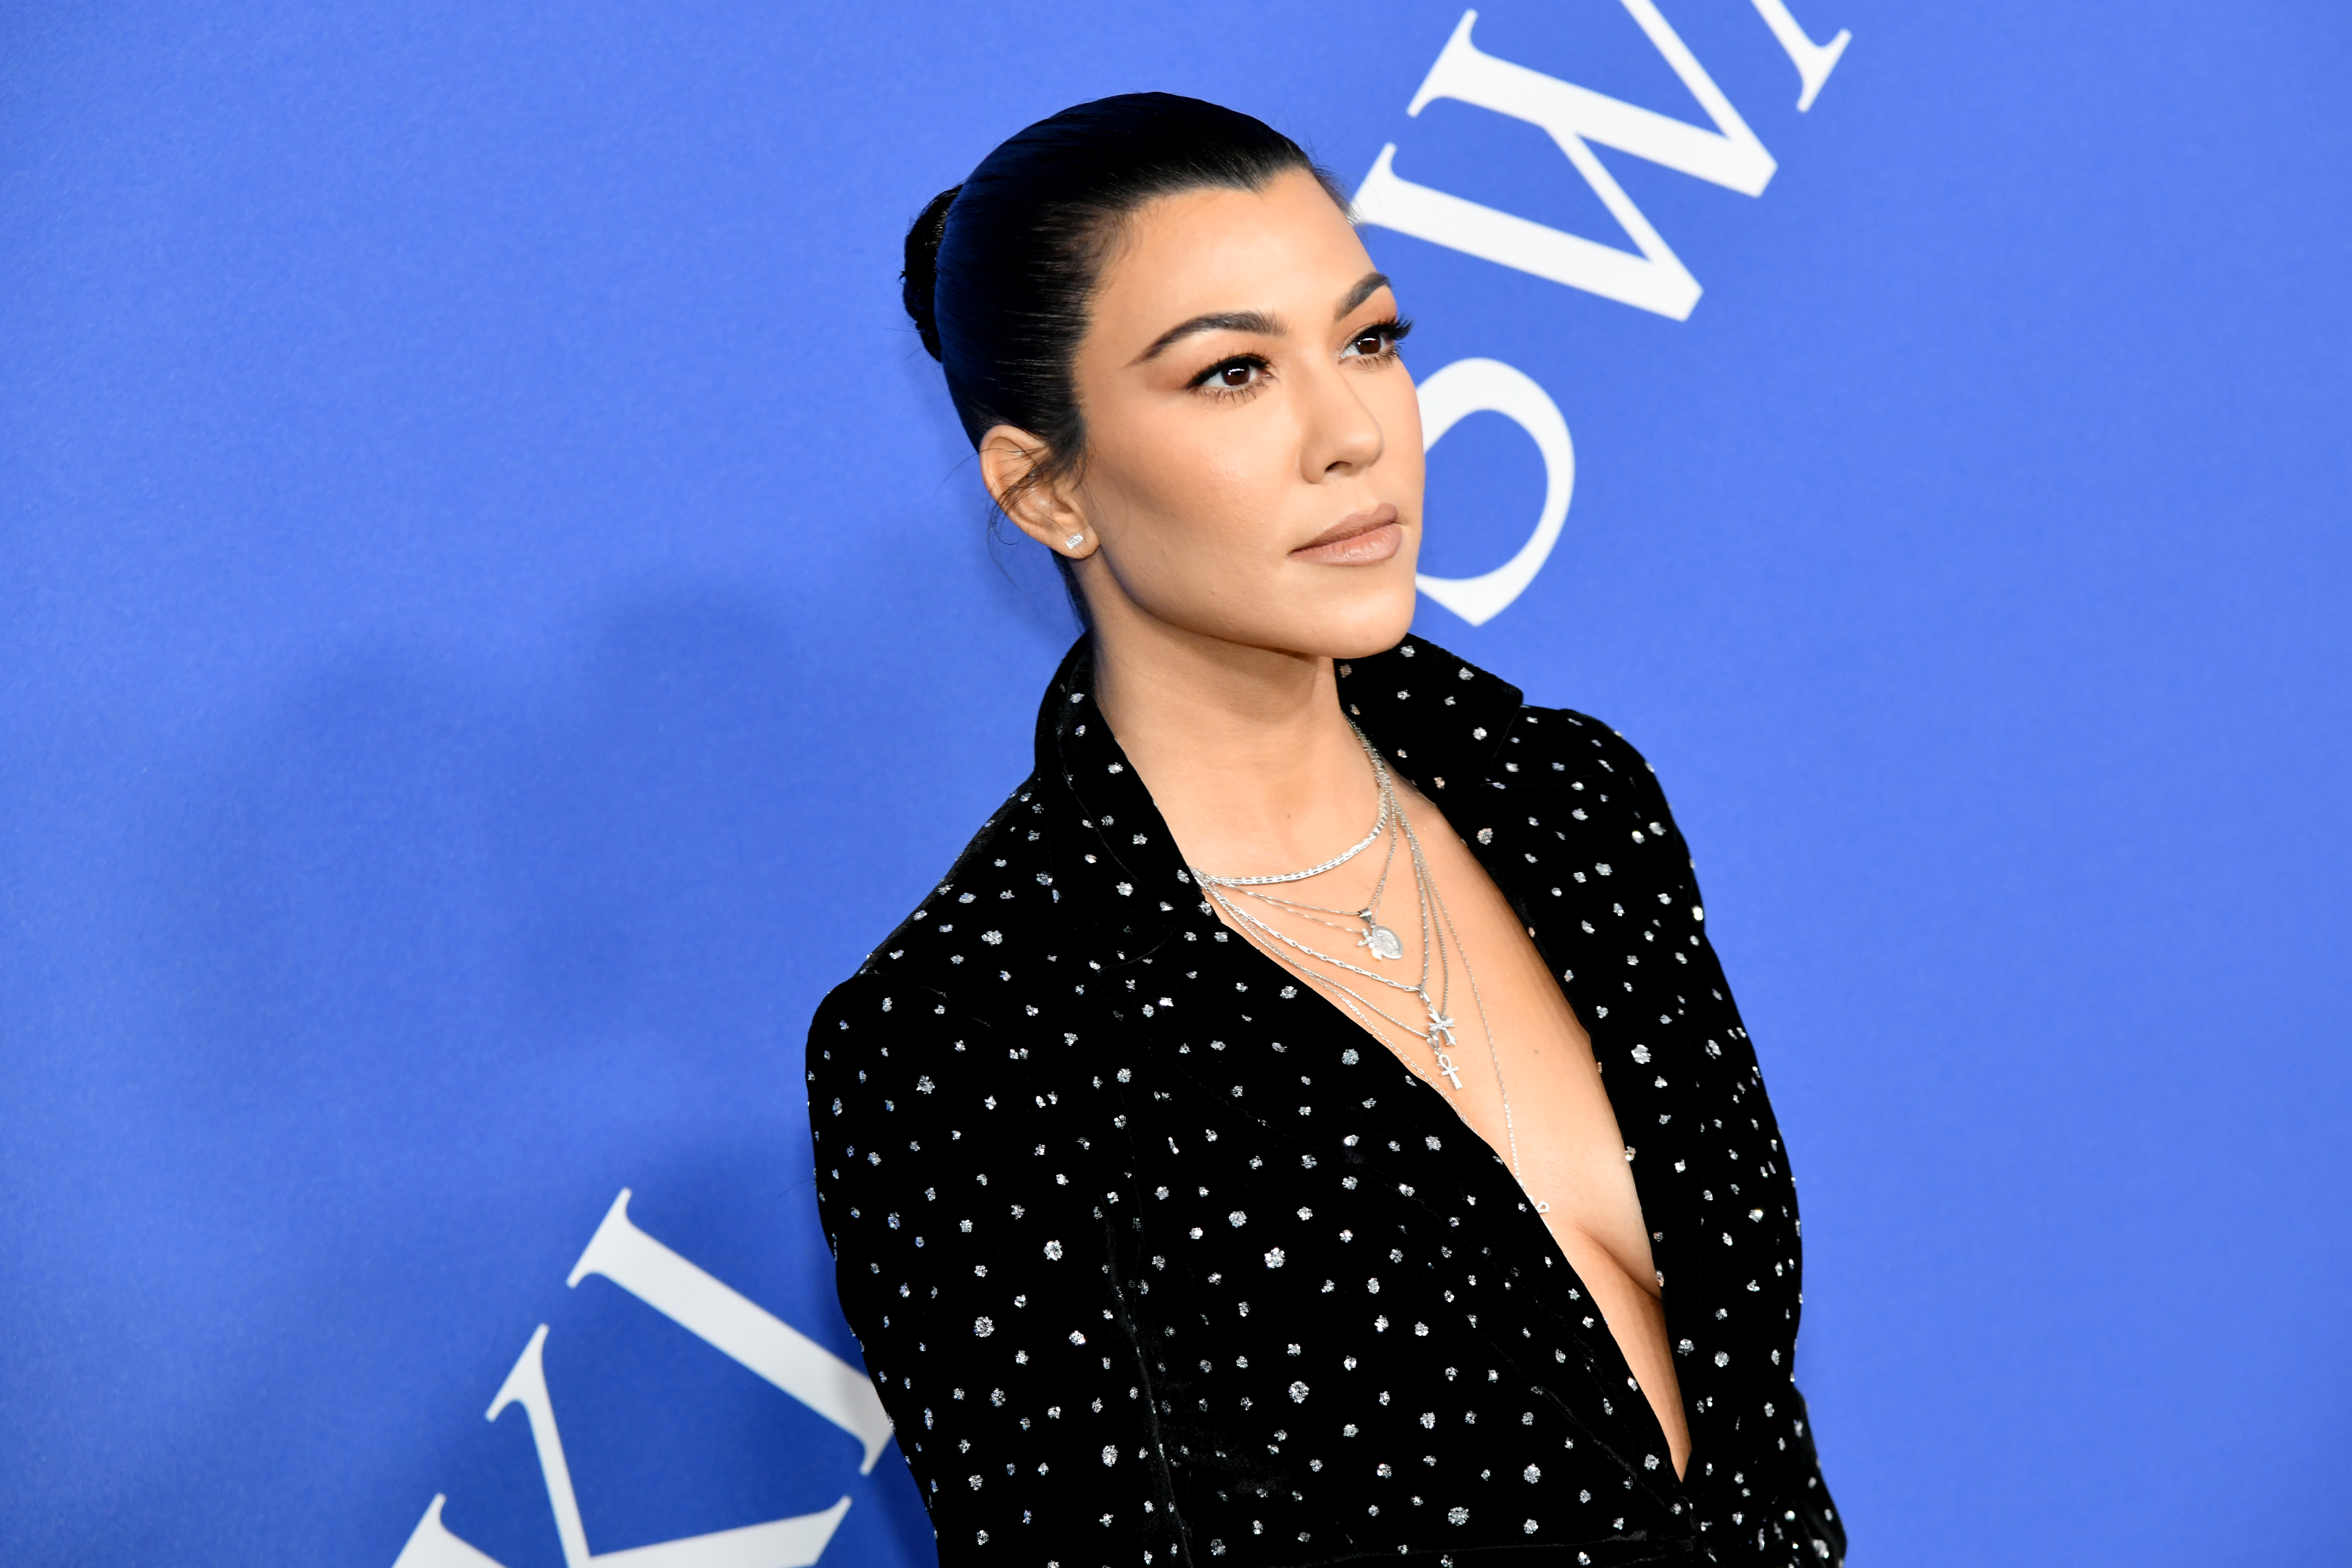 Kourtney Kardashian Shares Vulnerable Post About ‘Not Feeling Quite Ready’ To Go Back To Work Postpartum